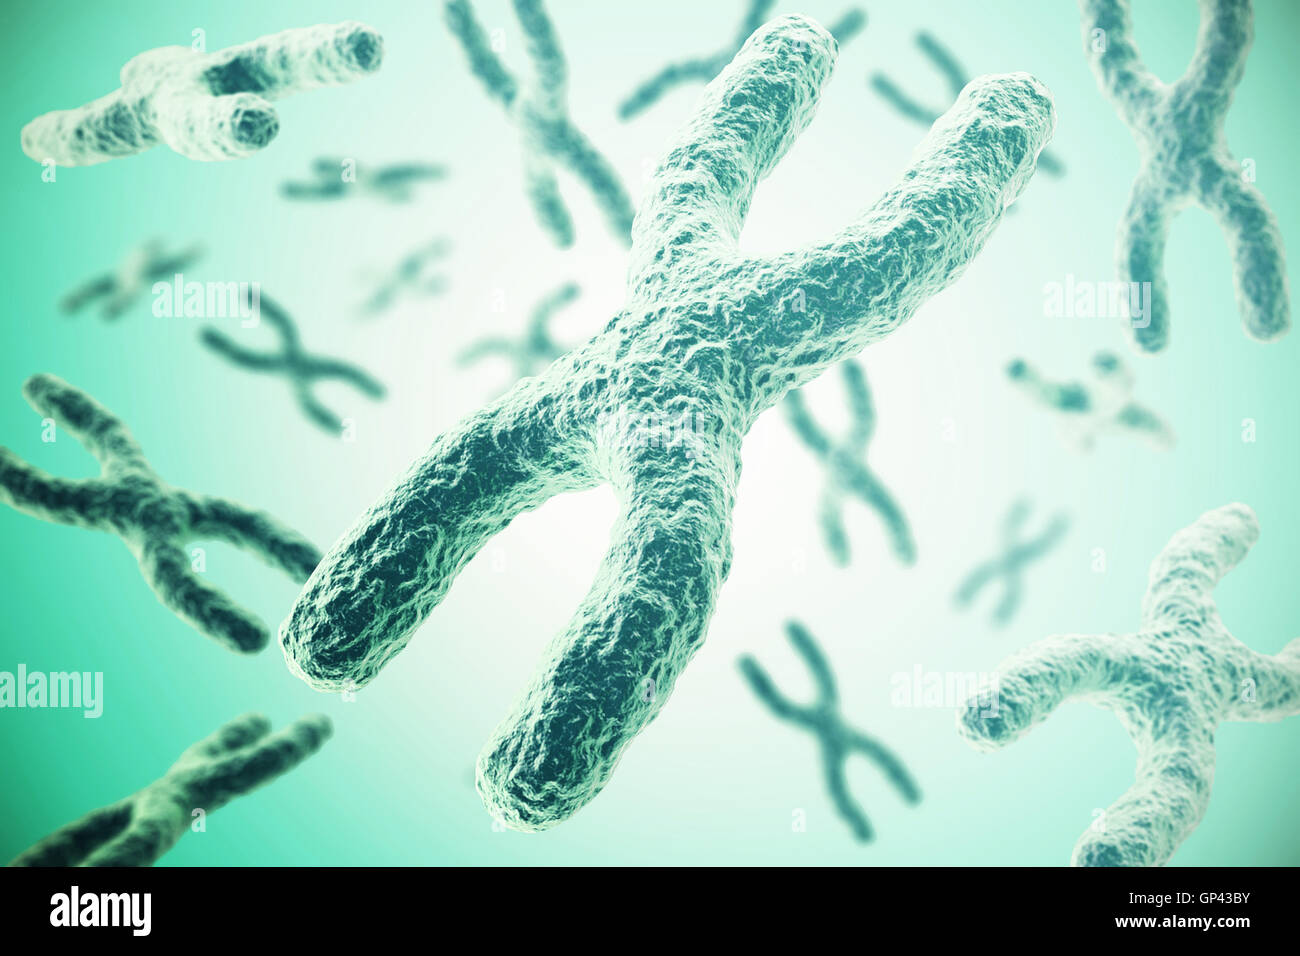 Chromosomes on green background, scientific concept 3d illustration Stock Photo